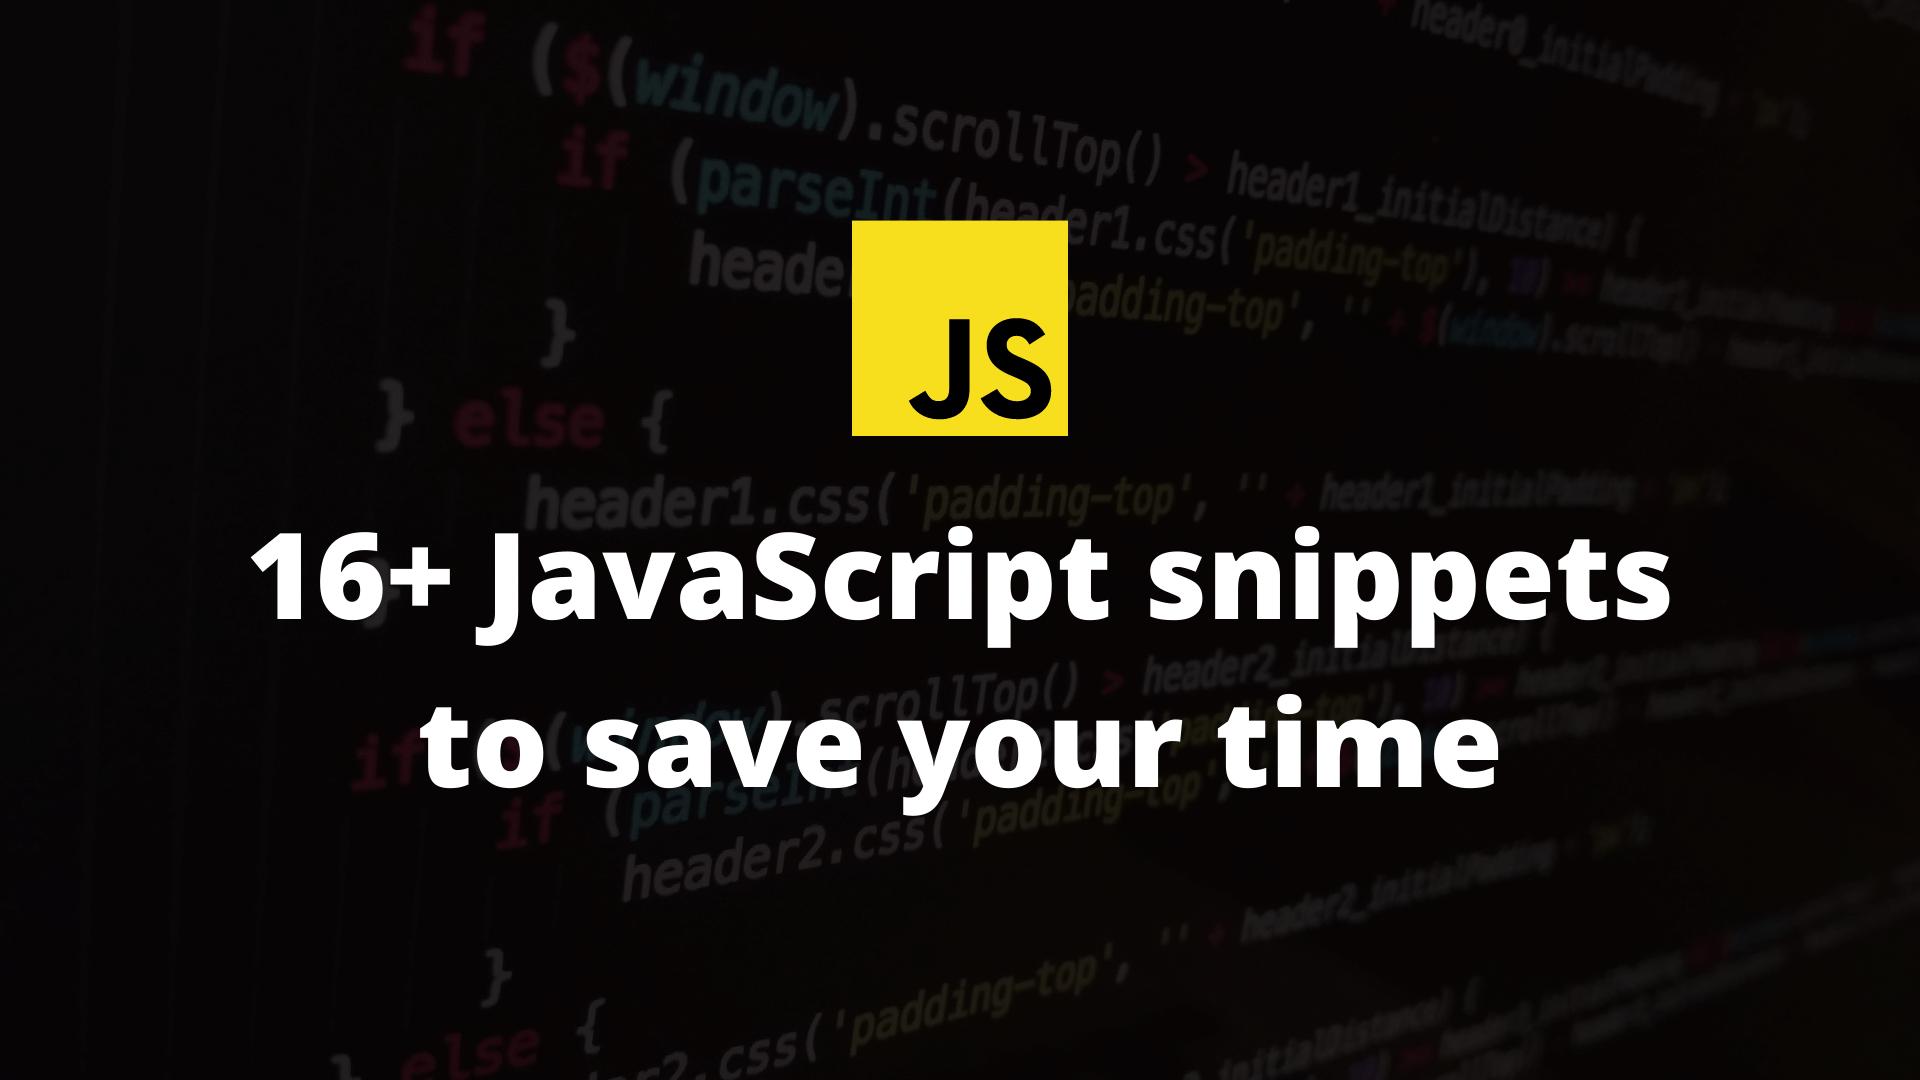 16+ JavaScript snippets to save your time